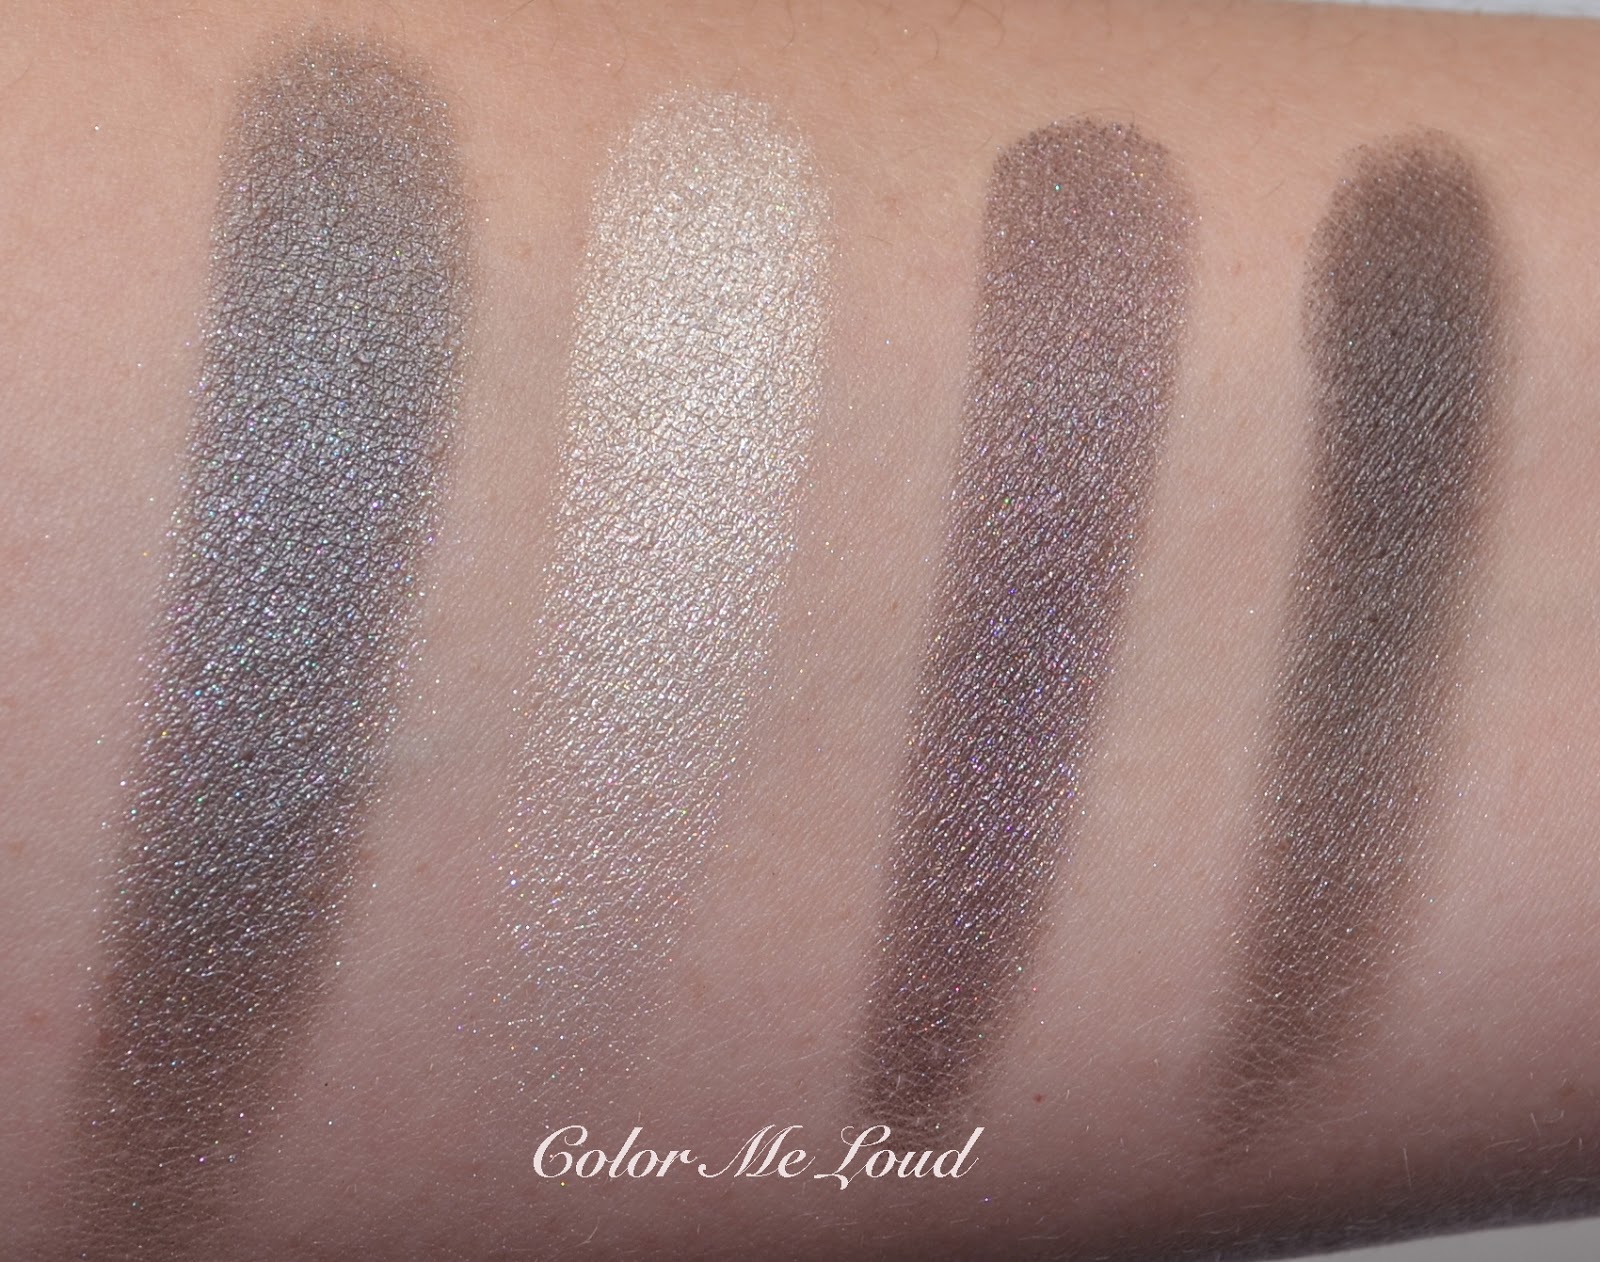 Swatches of the new Chanel Les 4 Ombres ft. Tisse Gabrielle